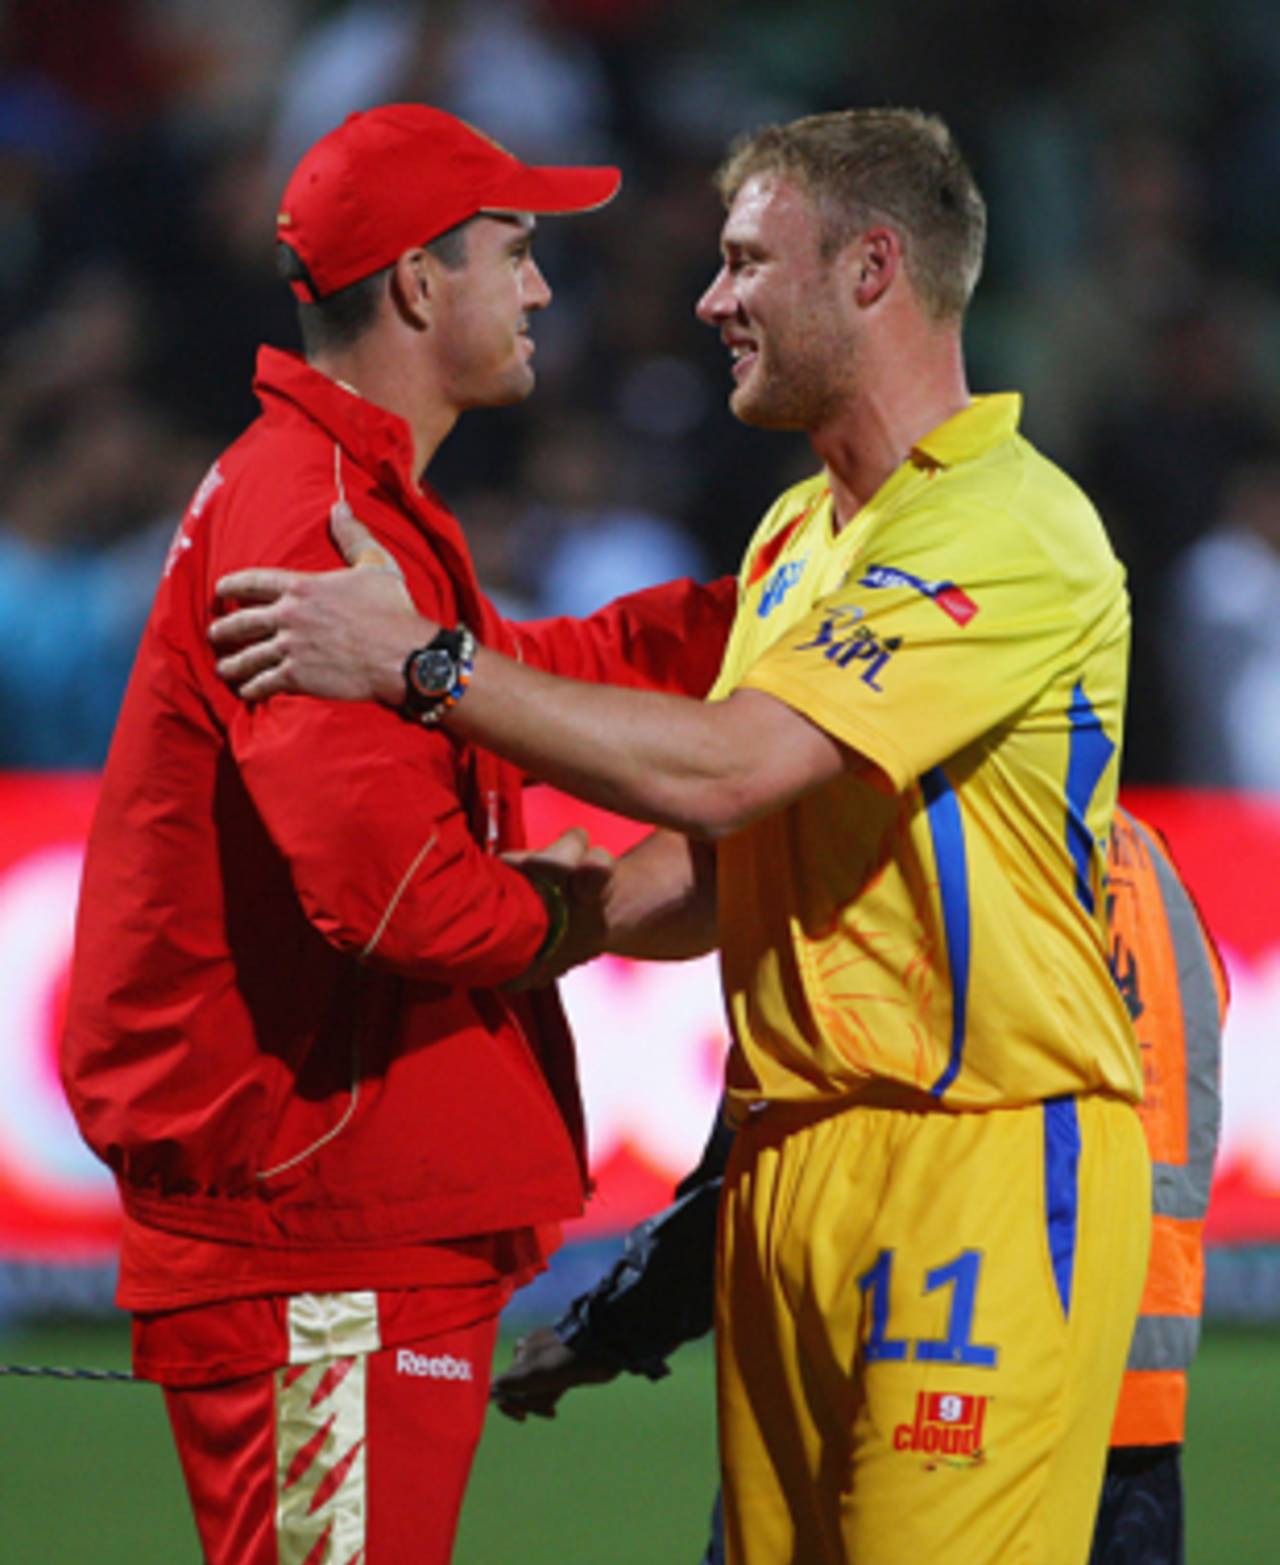 Contrasting fortunes no doubt for Kevin Pietersen and Andrew Flintoff, Bangalore Royal Challengers v Chennai Super Kings, IPL, 5th game, Port Elizabeth, April 20, 2009